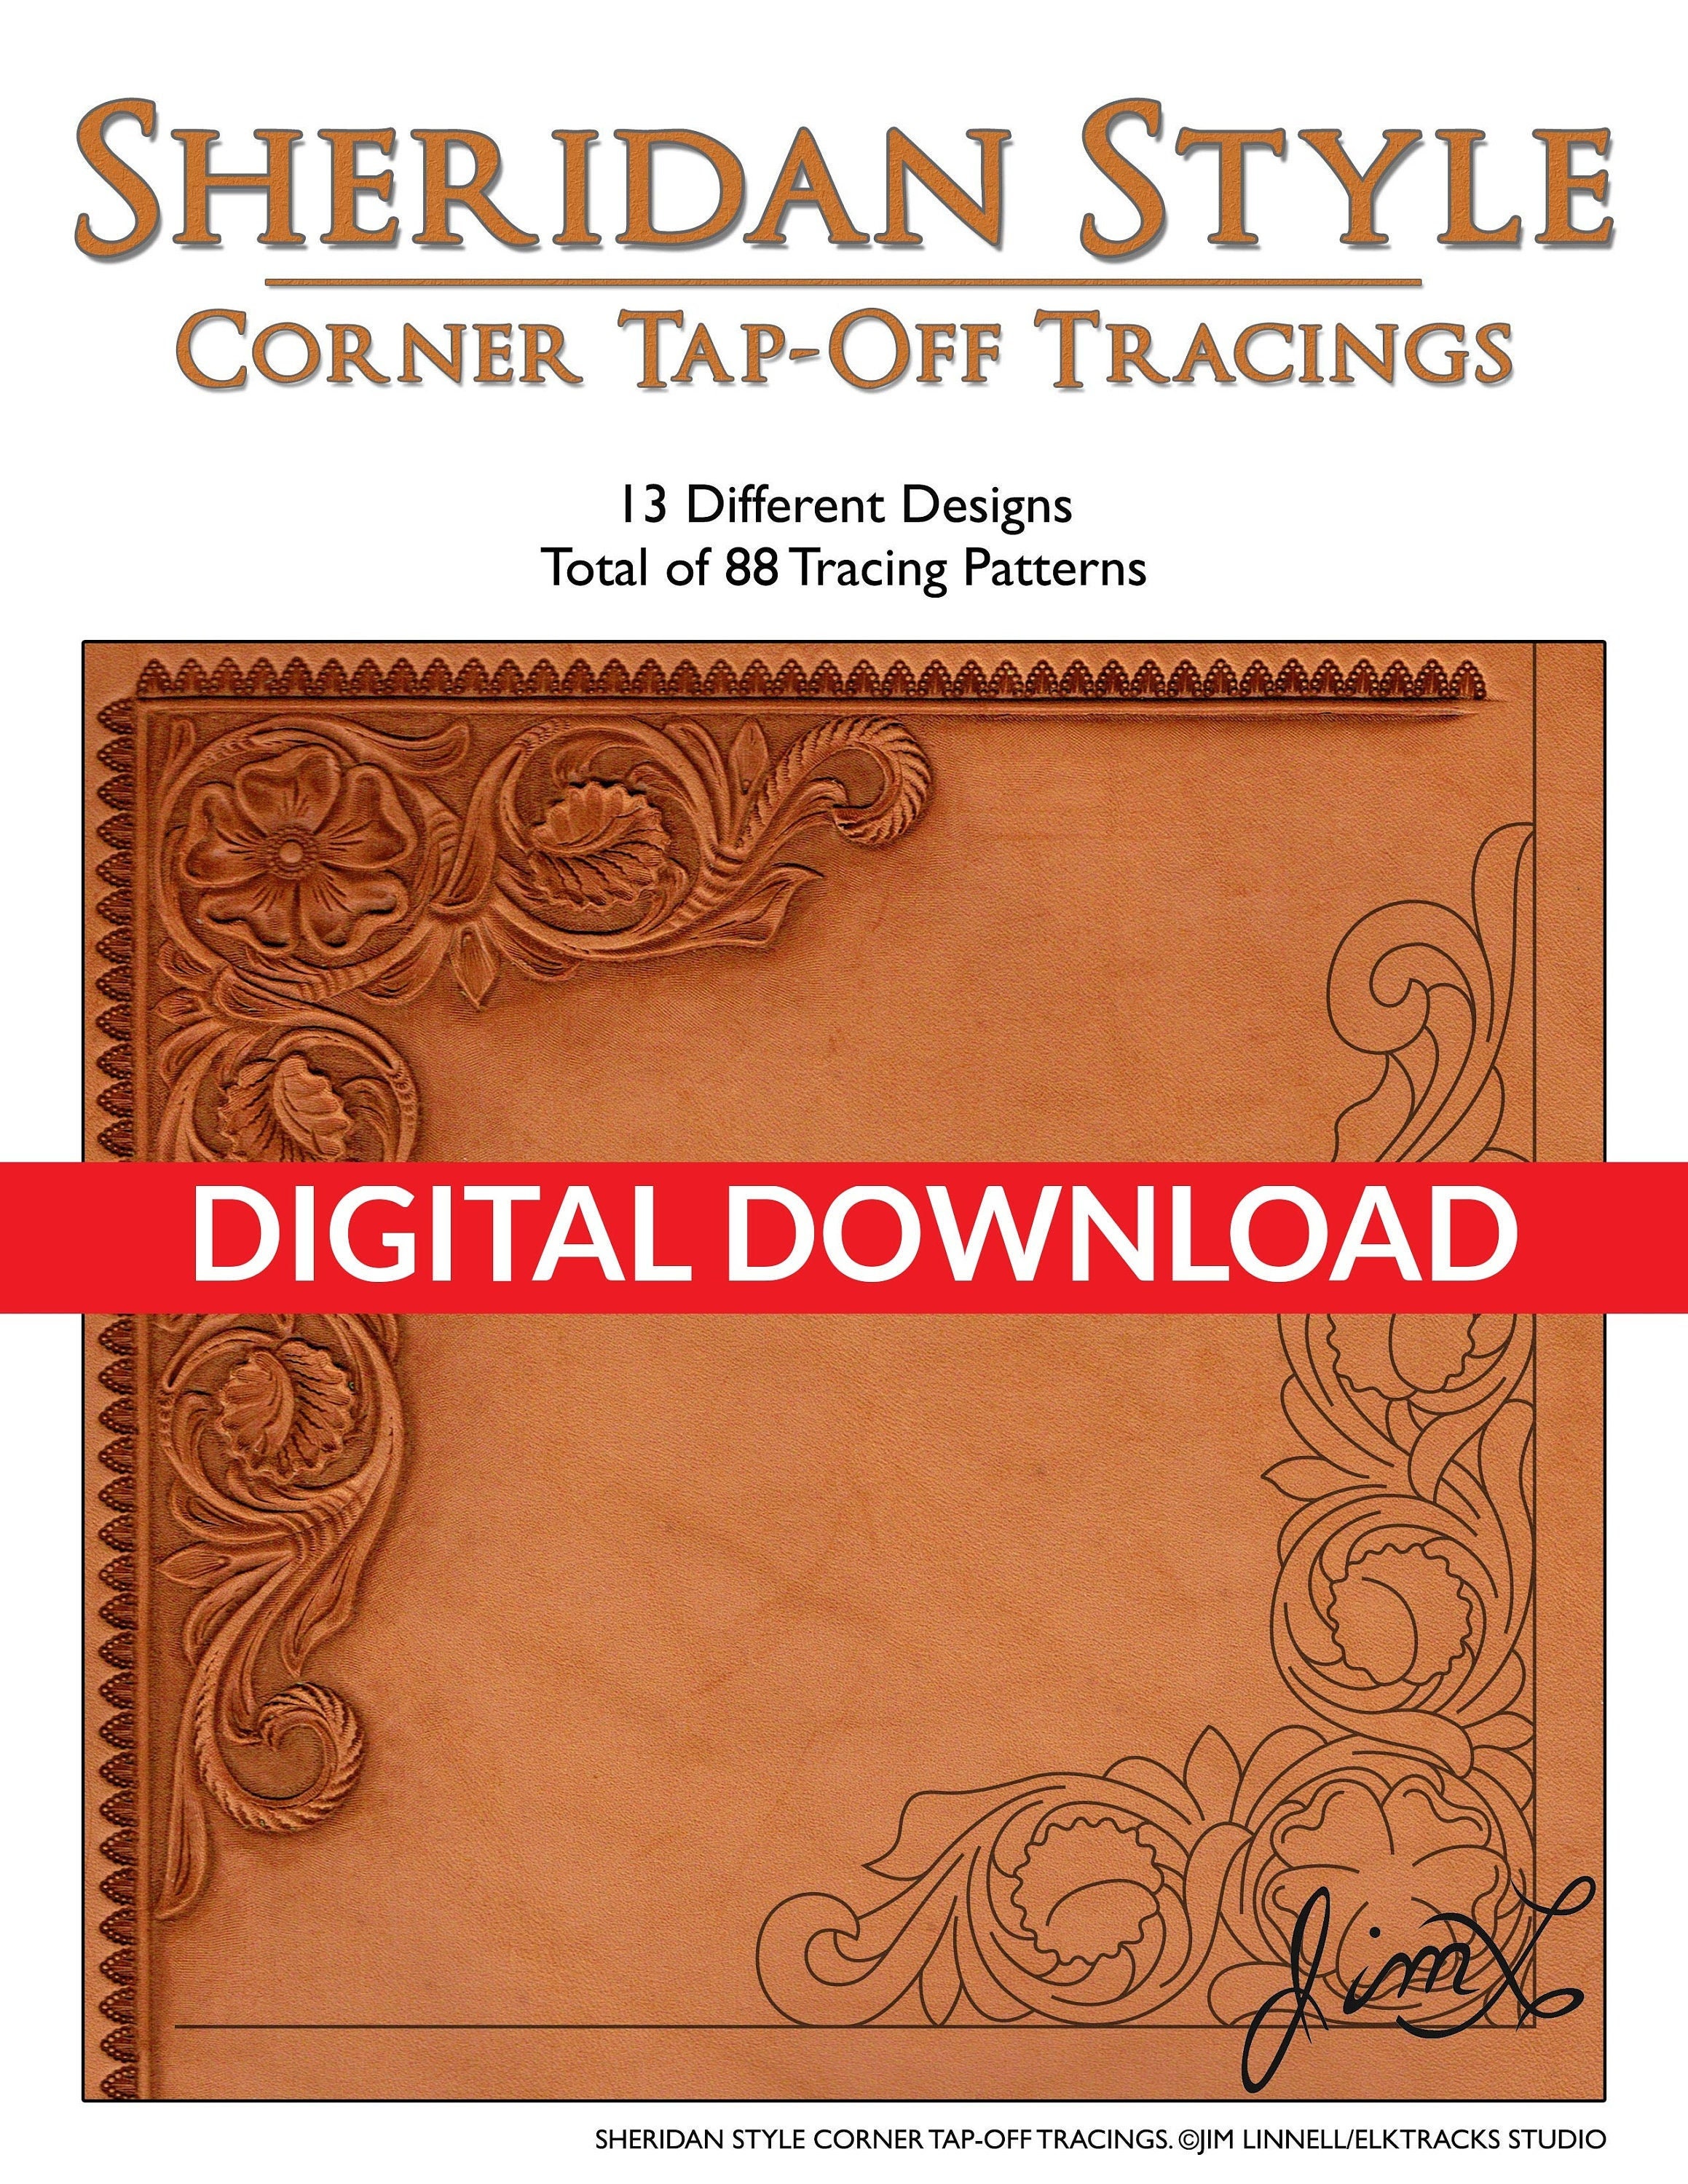 Sheridan Style Corner Tap-off Tracings 88 Tracing Patterns by Jim Linnell  leather Patterns DIGITAL DOWNLOAD 